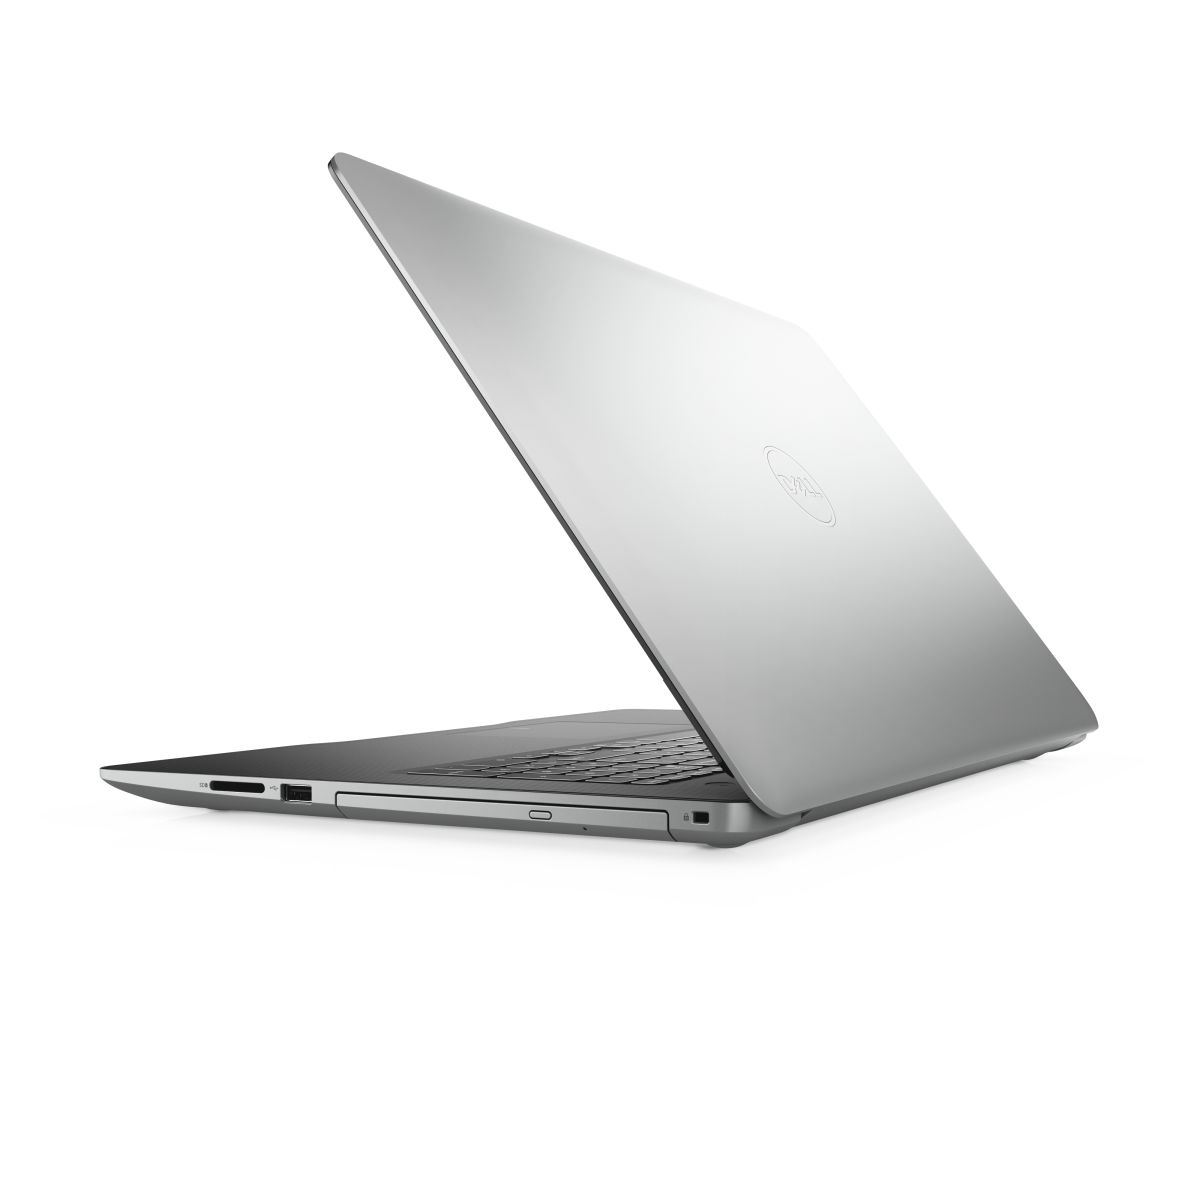 Dell Inspiron 3780 3780 5330 Laptop Specifications 5334